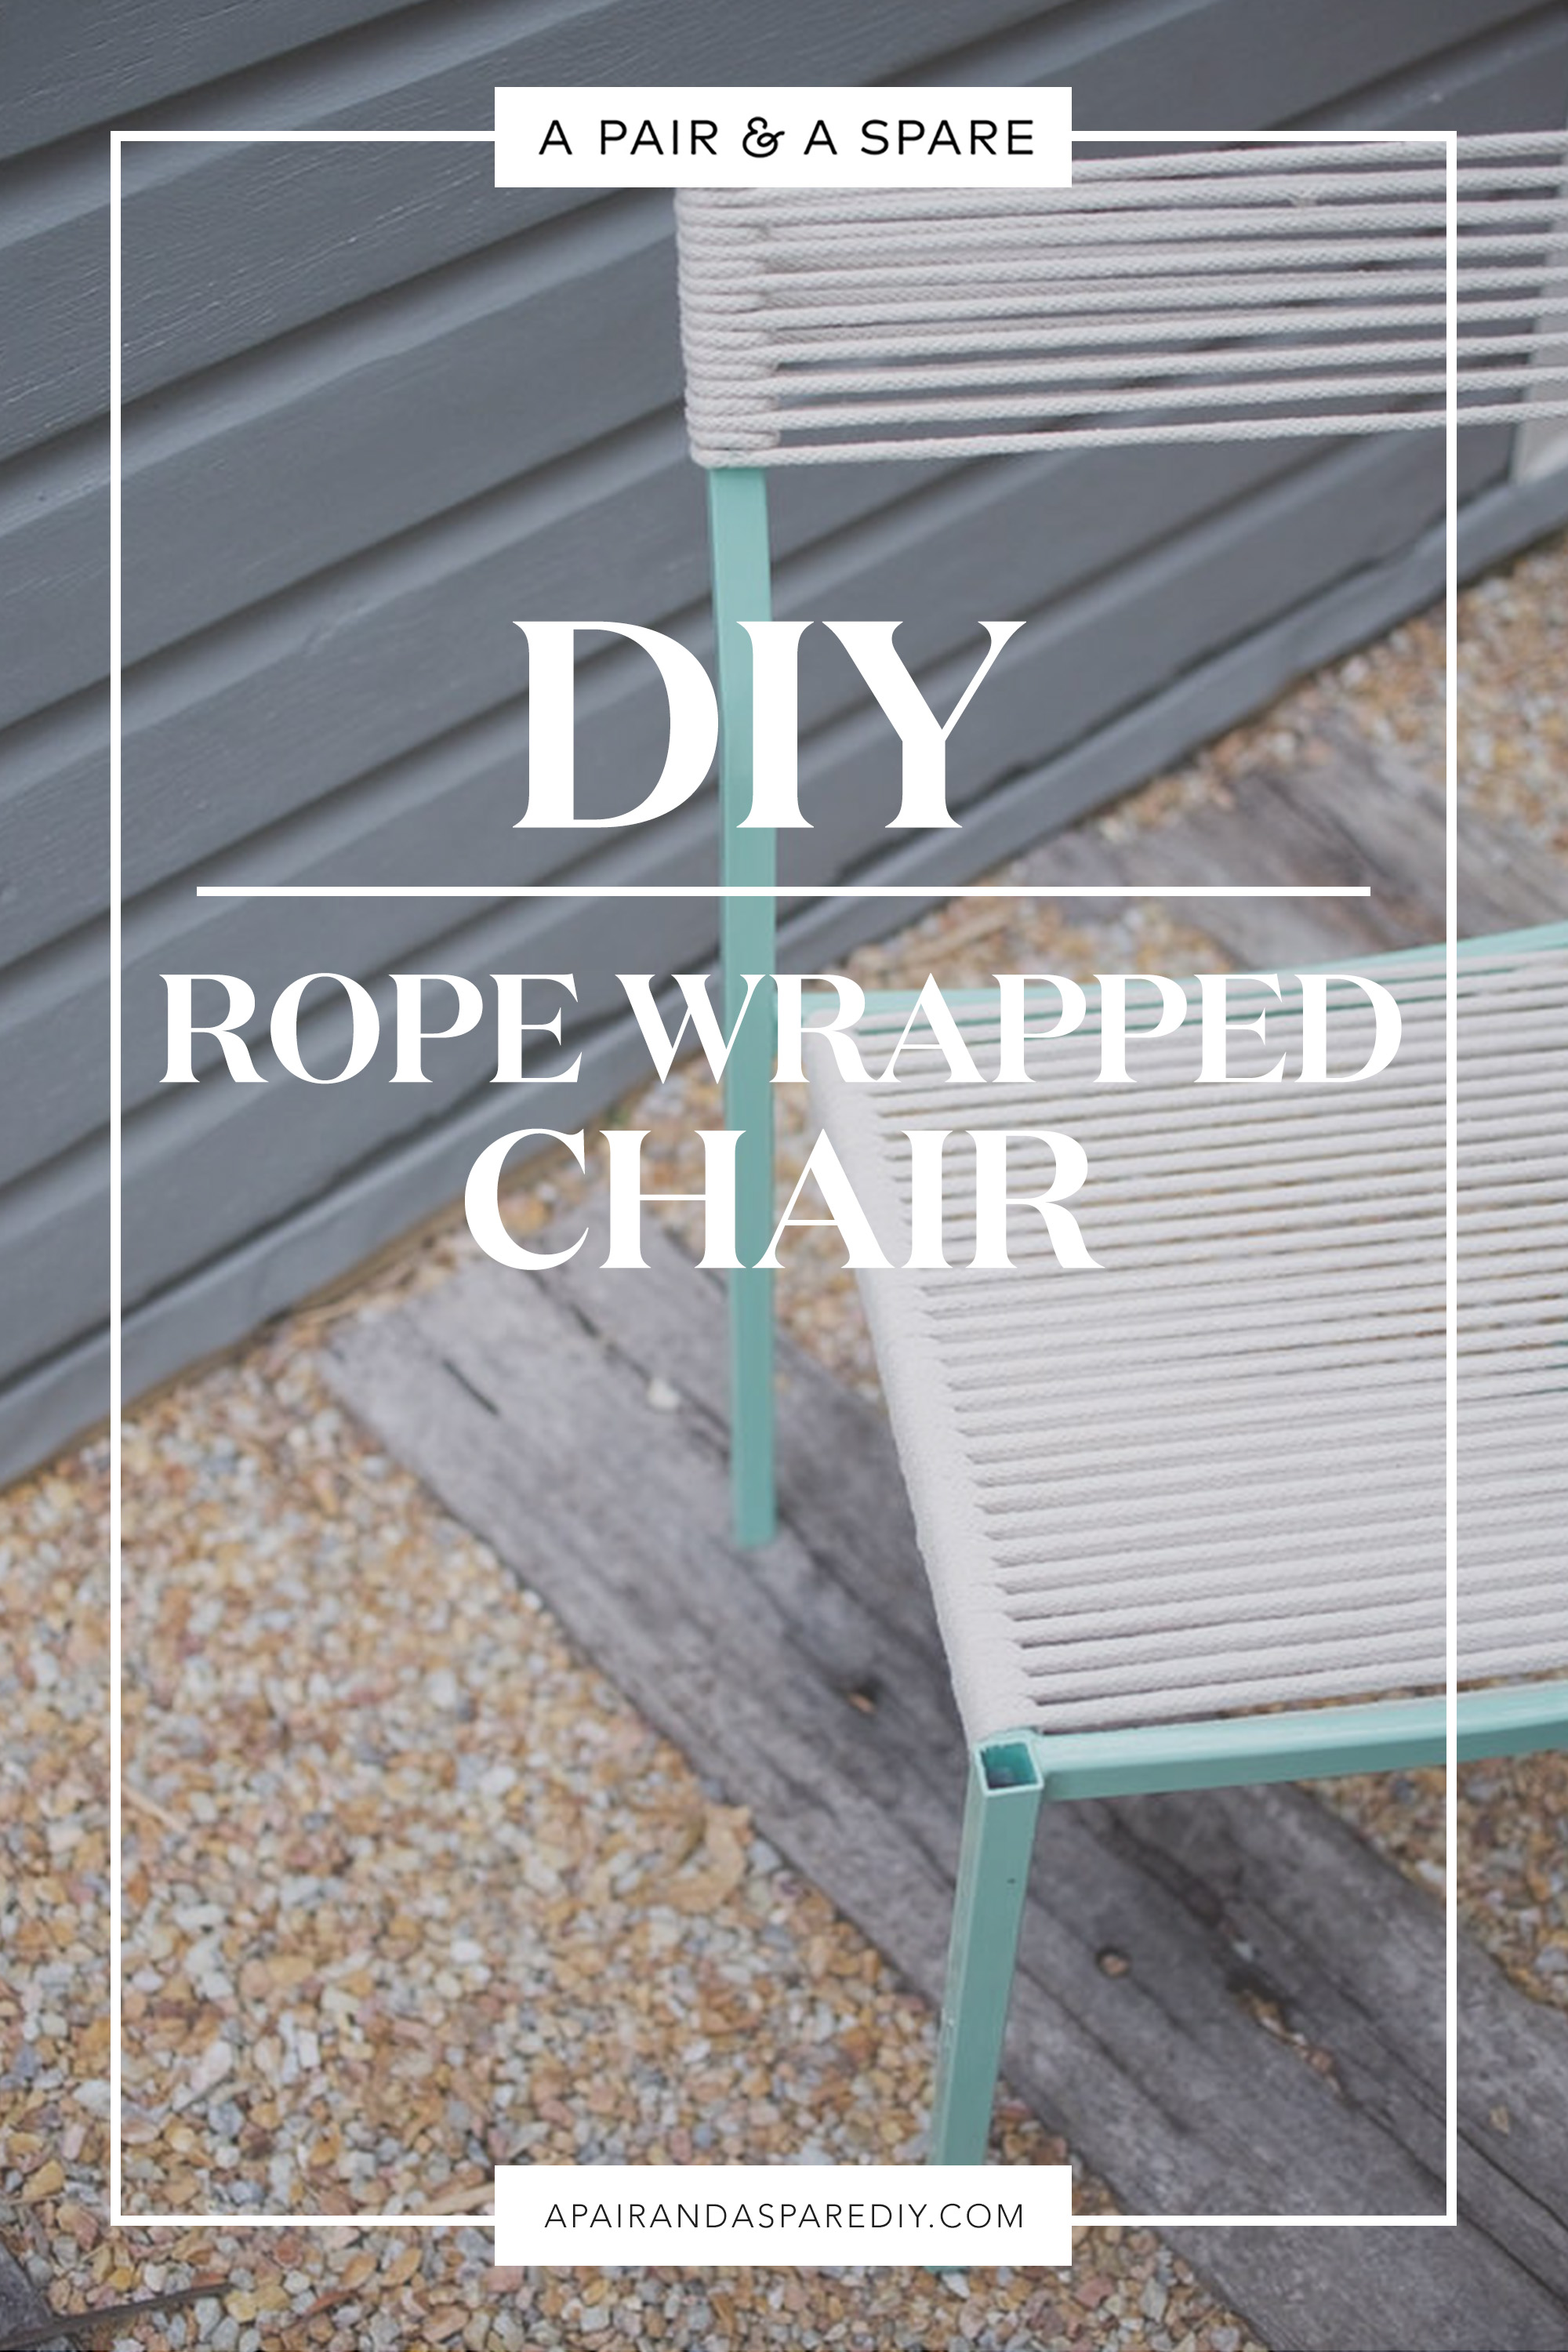 DIY Rope Wrapped Chair